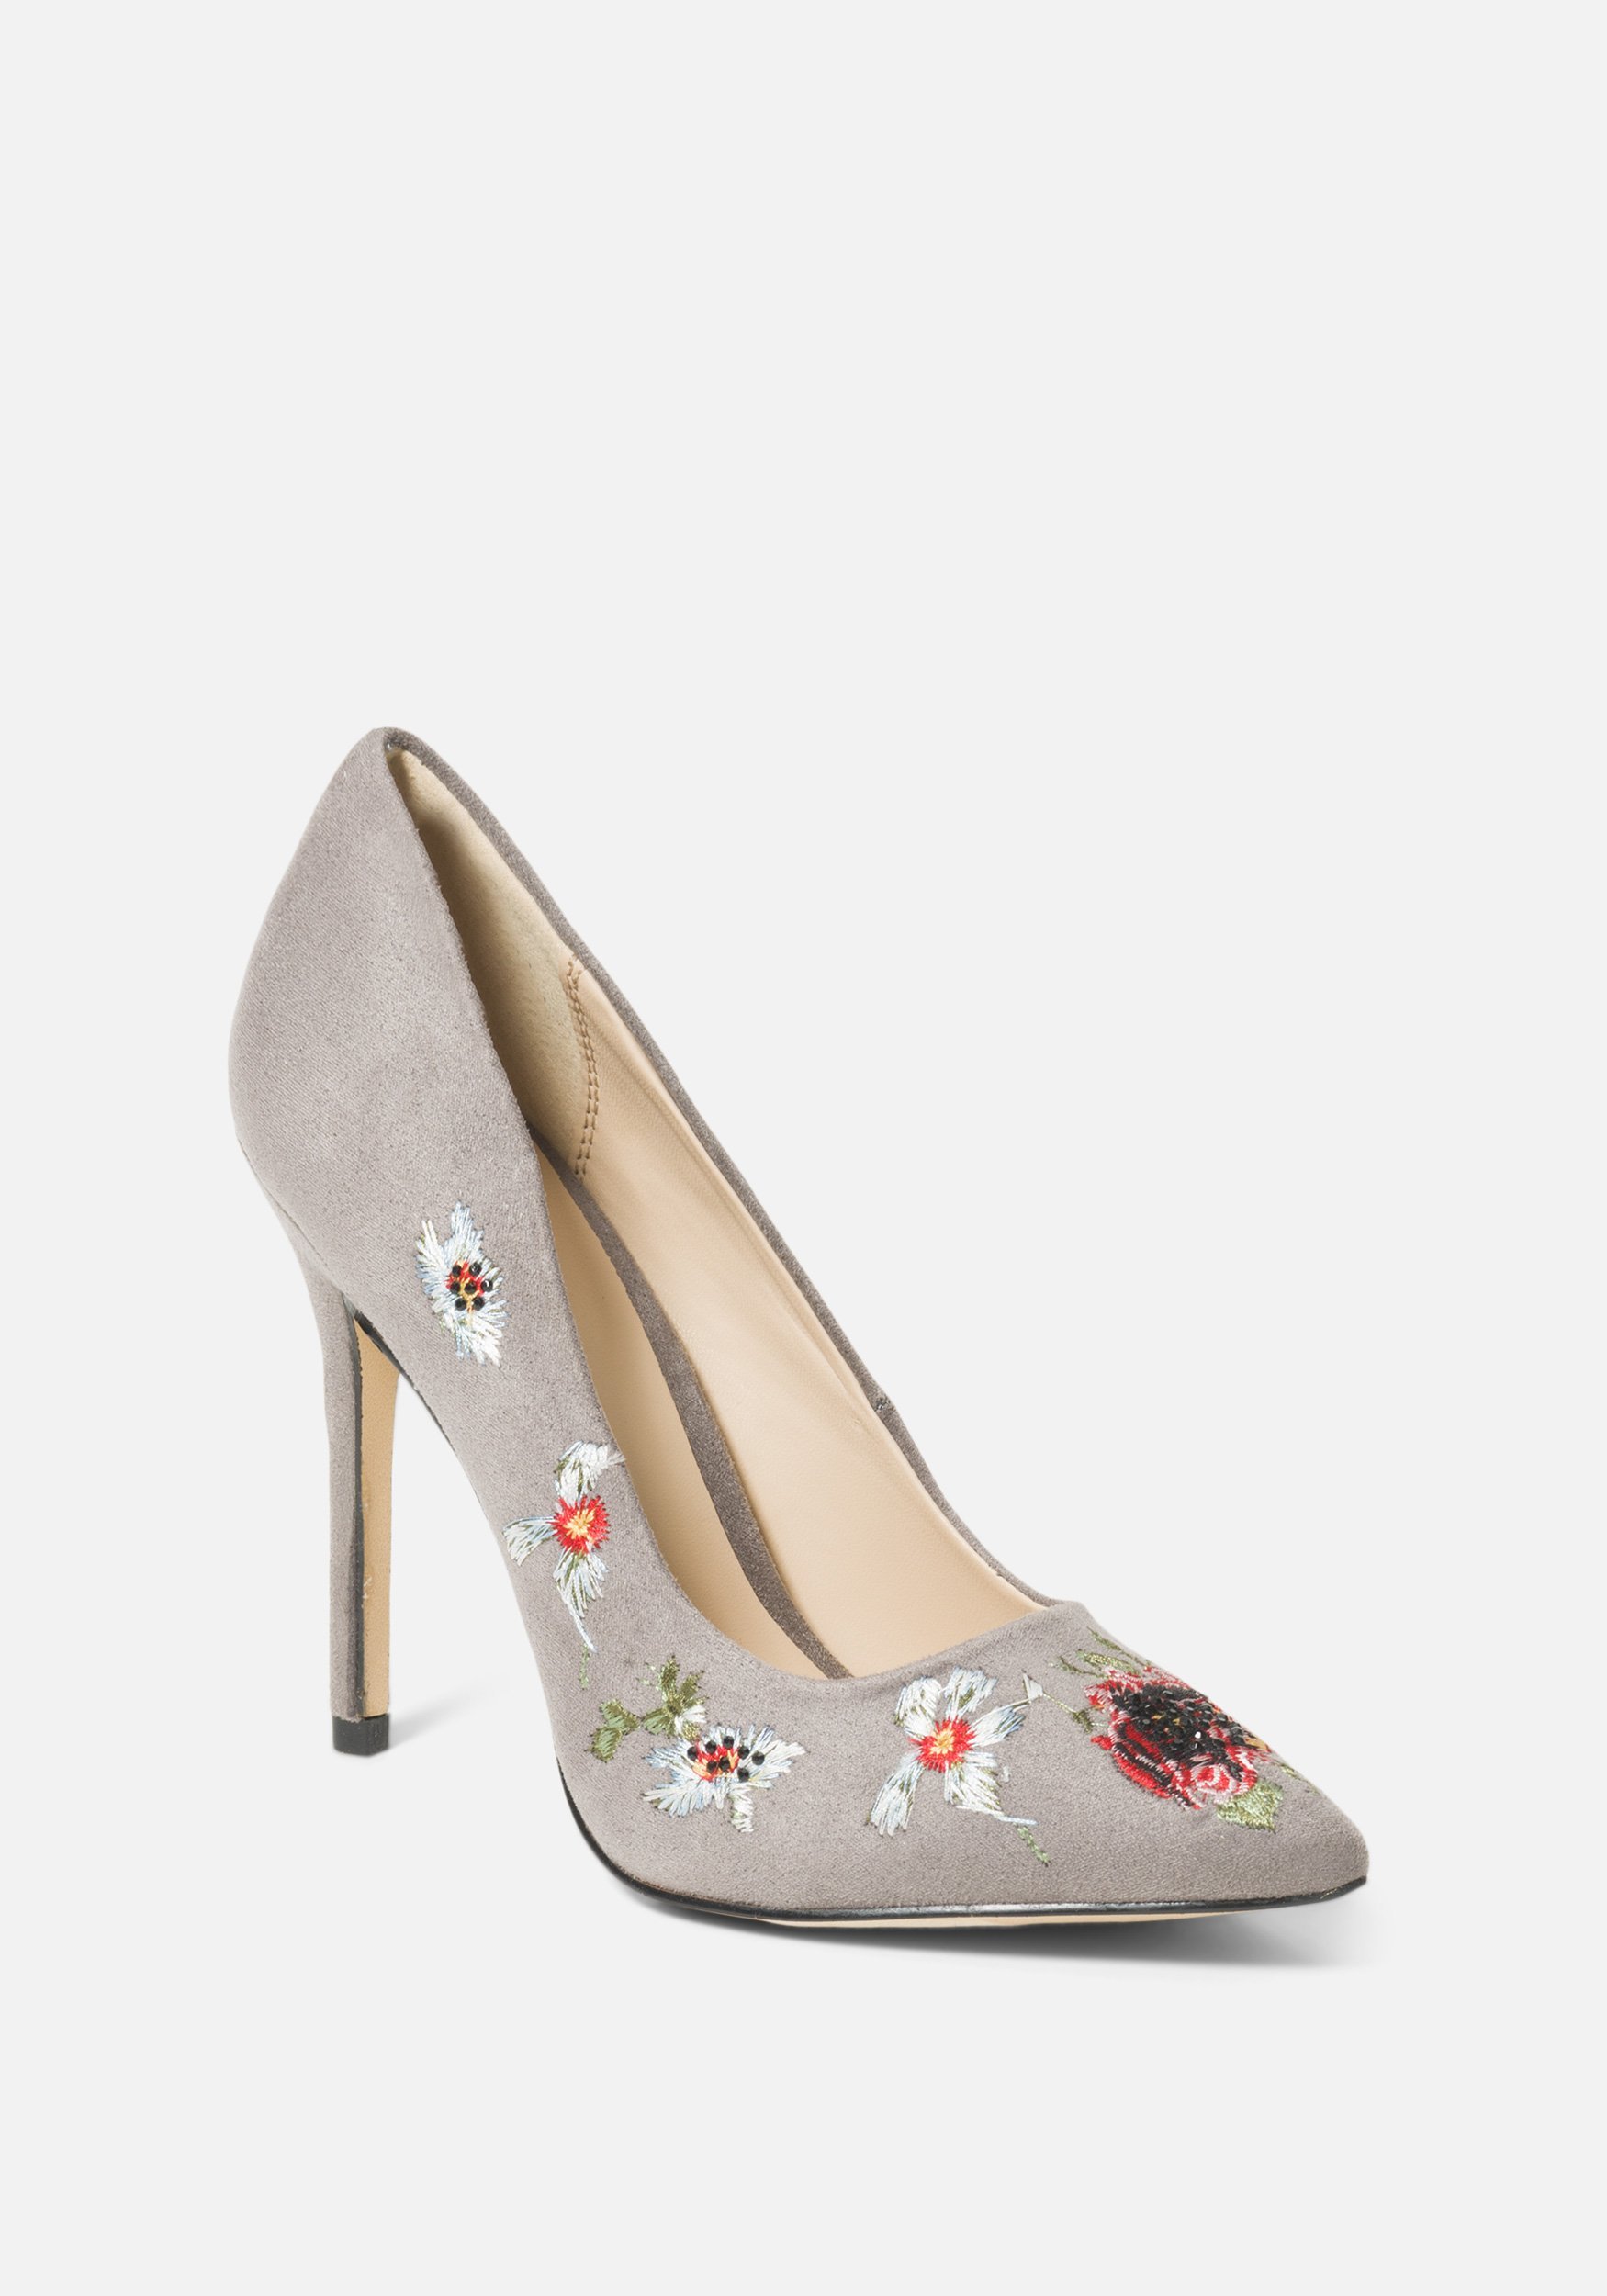 Bebe Women's Leyton Embroidery Pumps, Size 6.5 in Grey Synthetic